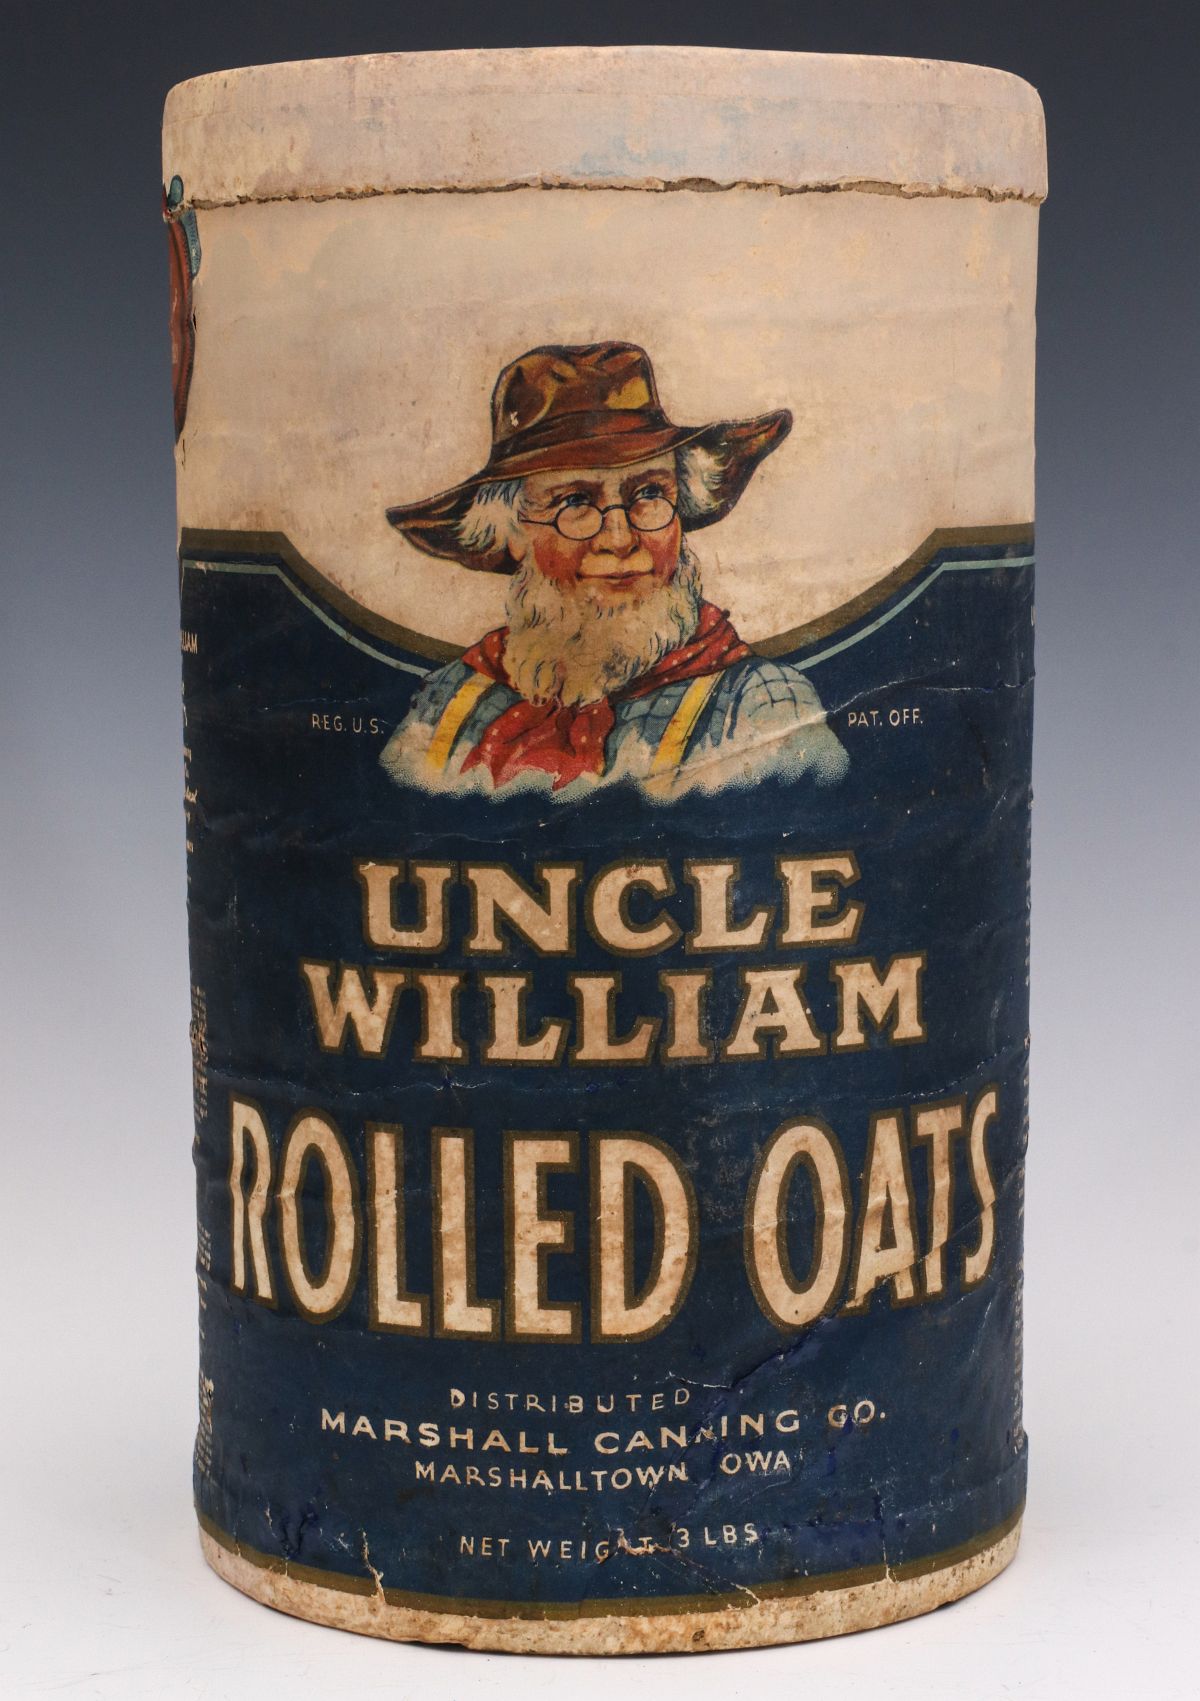 AN UNCLE WILLIAM ROLLED OATS CONTAINER CIRCA 1930